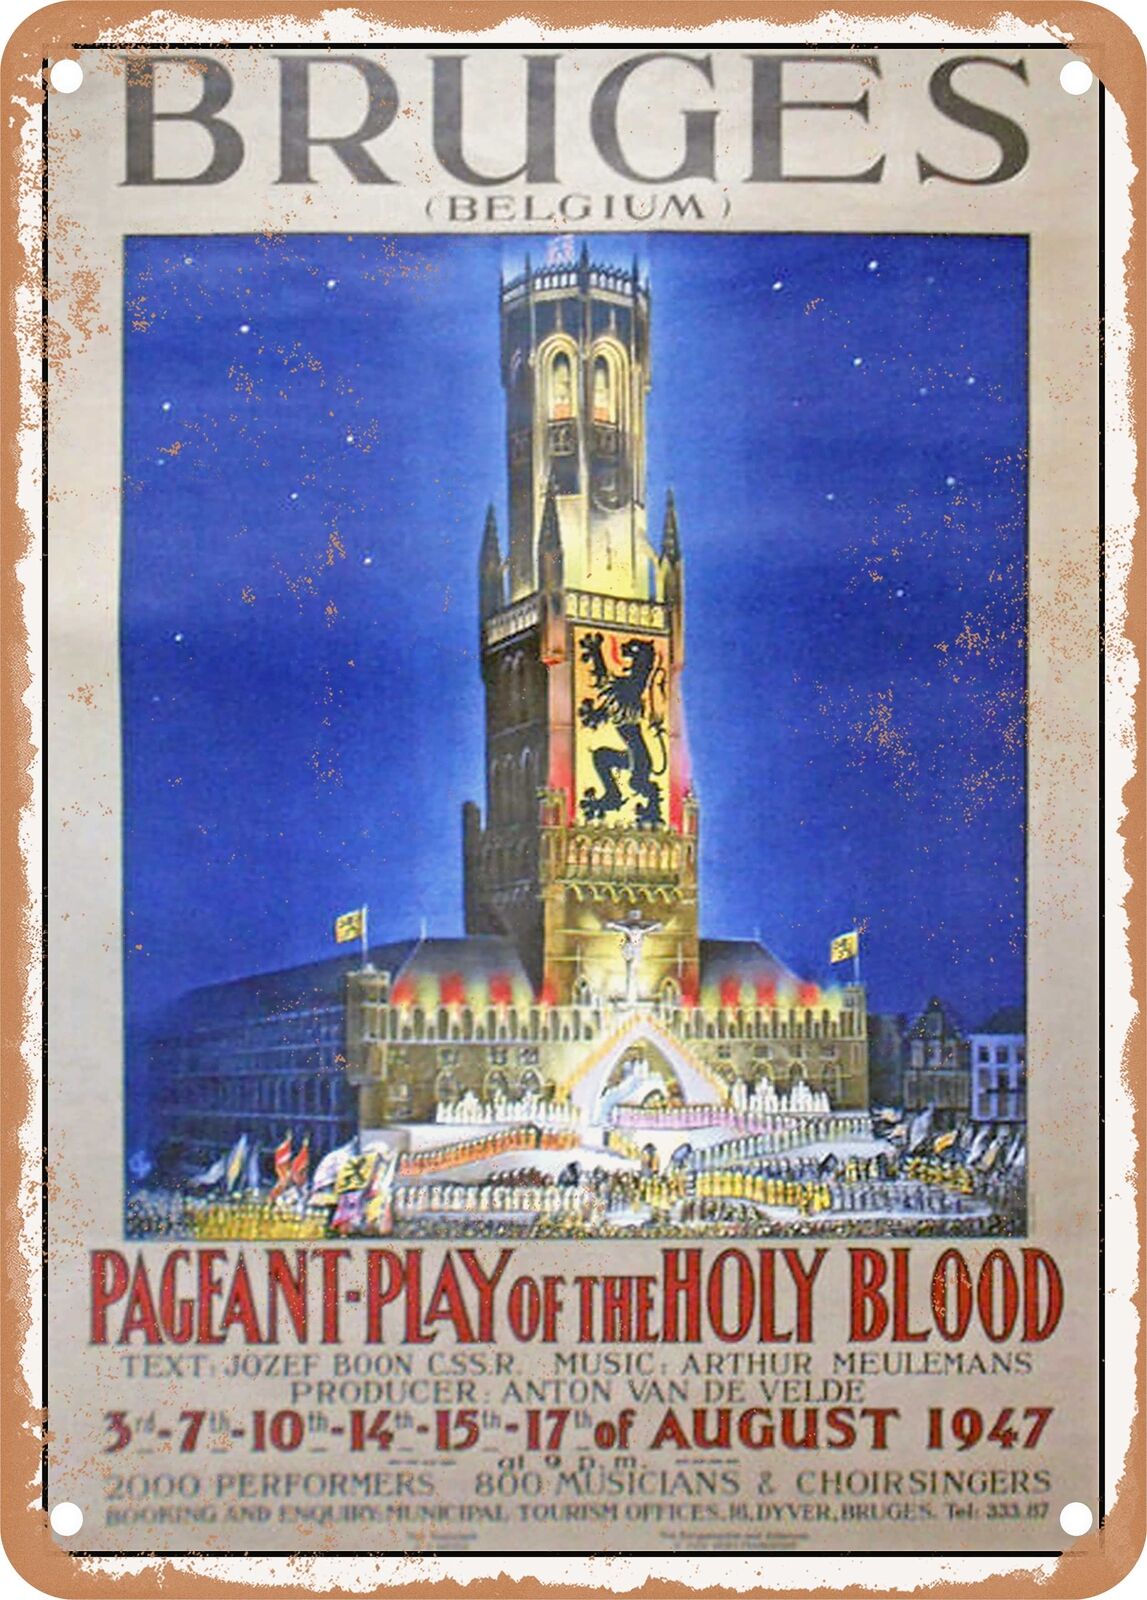 METAL SIGN - 1947 Bruges Belgium Pageant Play of the Holy Blood Vintage Ad